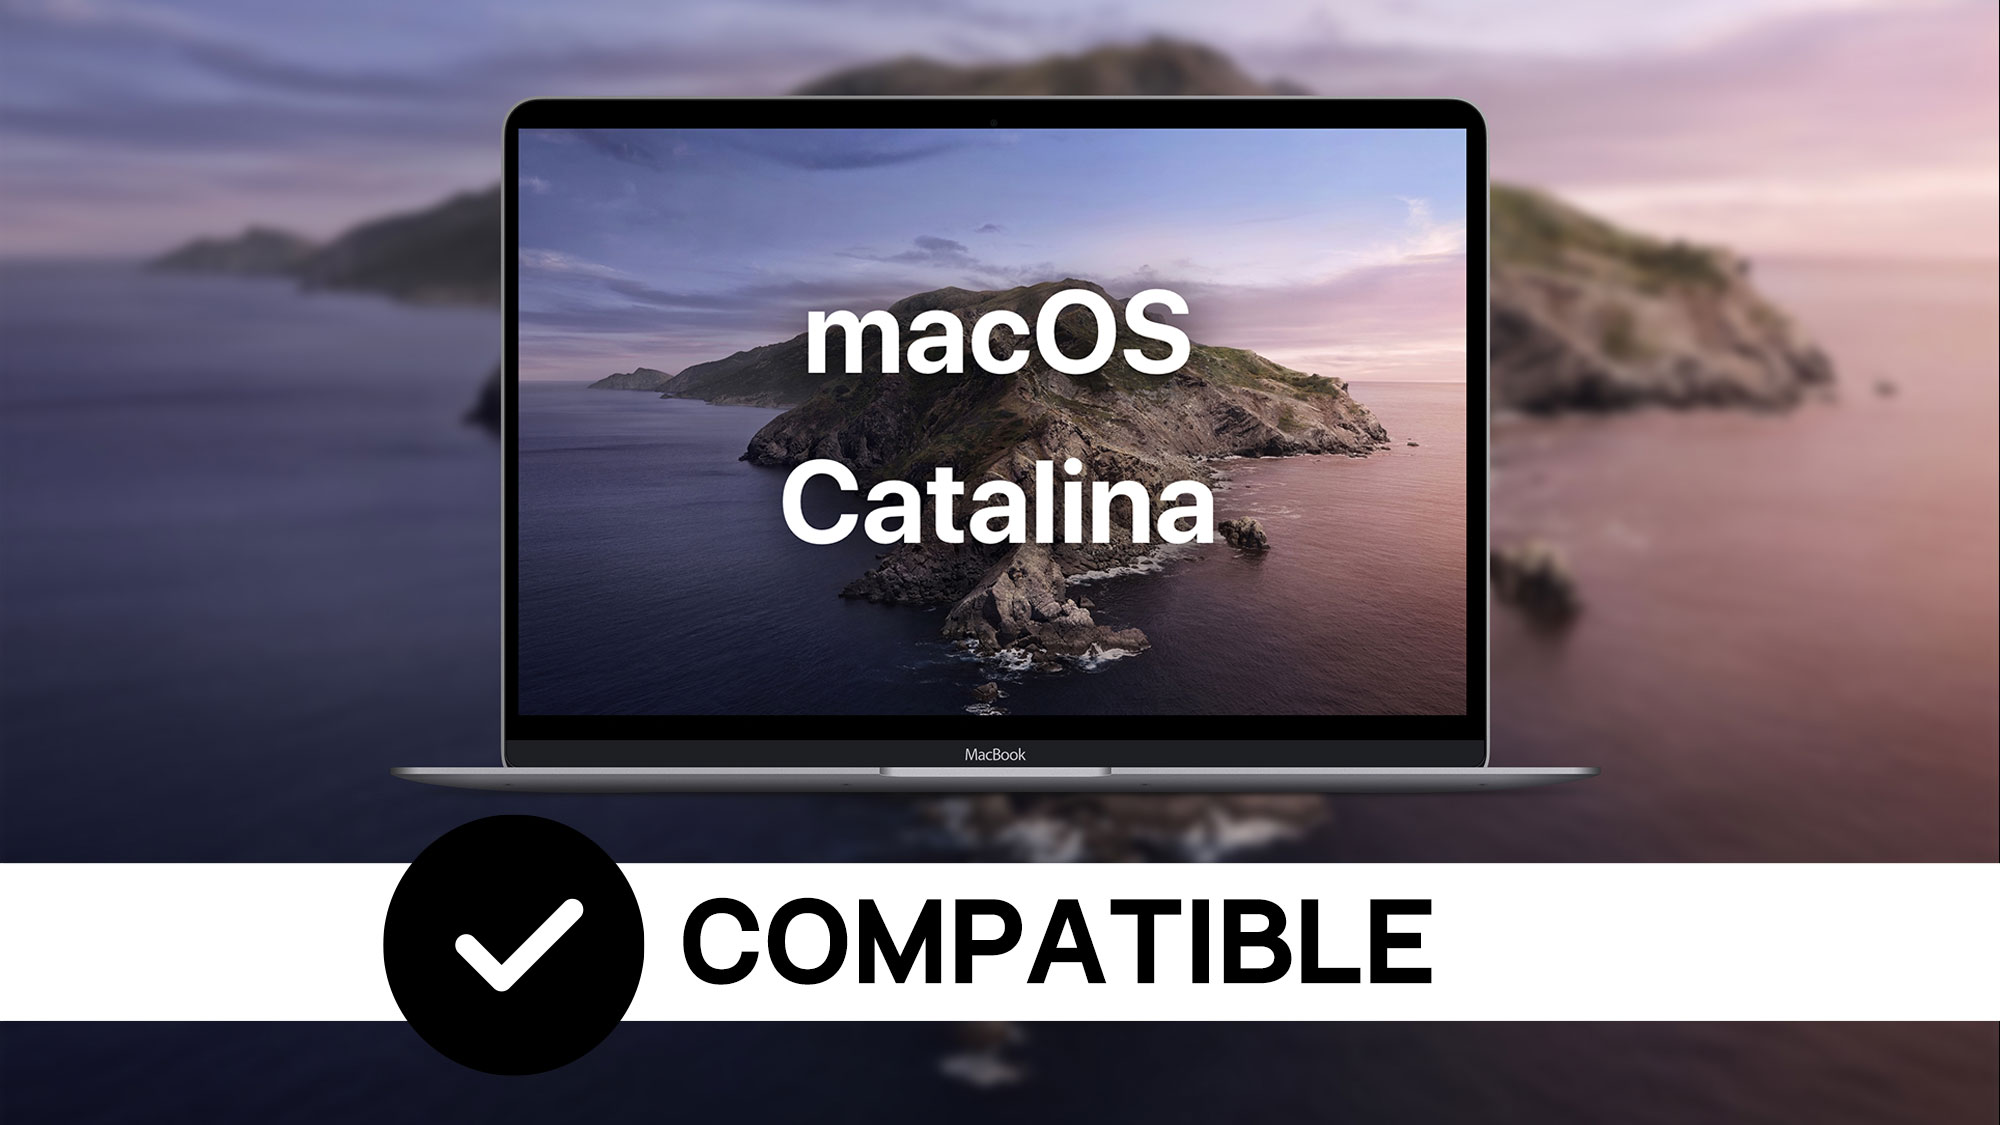 mac os catalina compatable 2000x1125px white